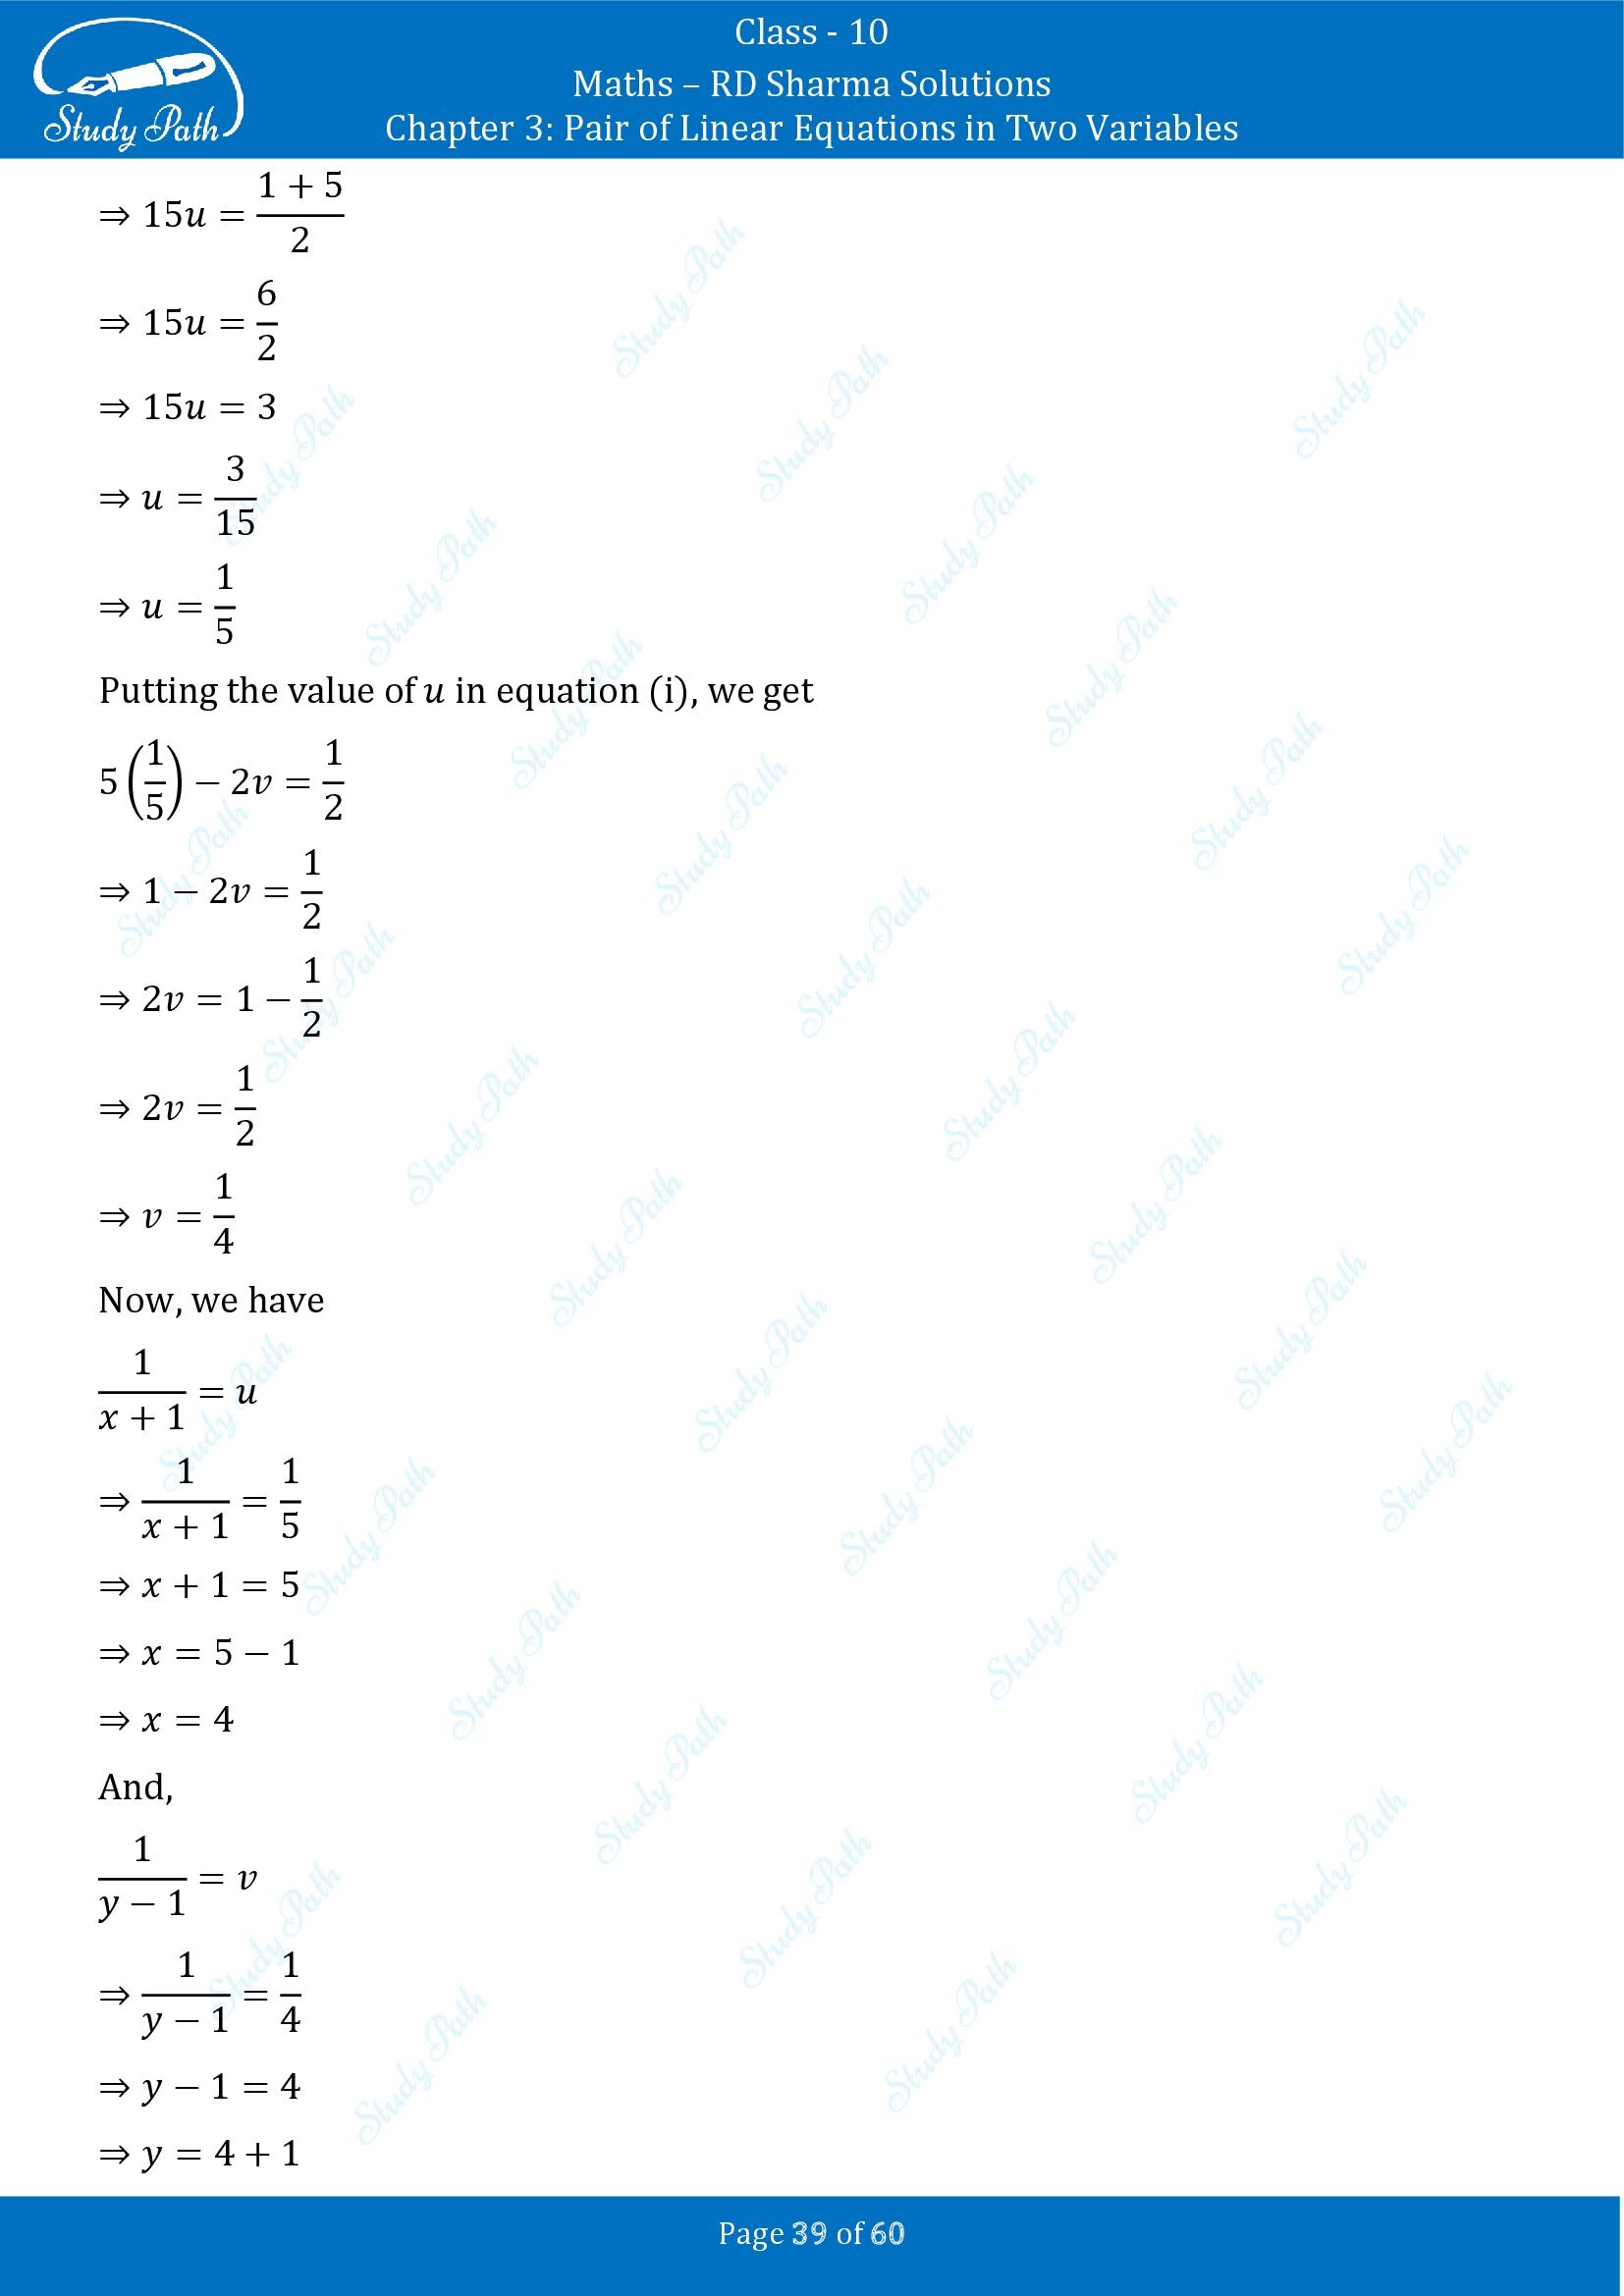 RD Sharma Solutions Class 10 Chapter 3 Pair of Linear Equations in Two Variables Exercise 3.3 00039